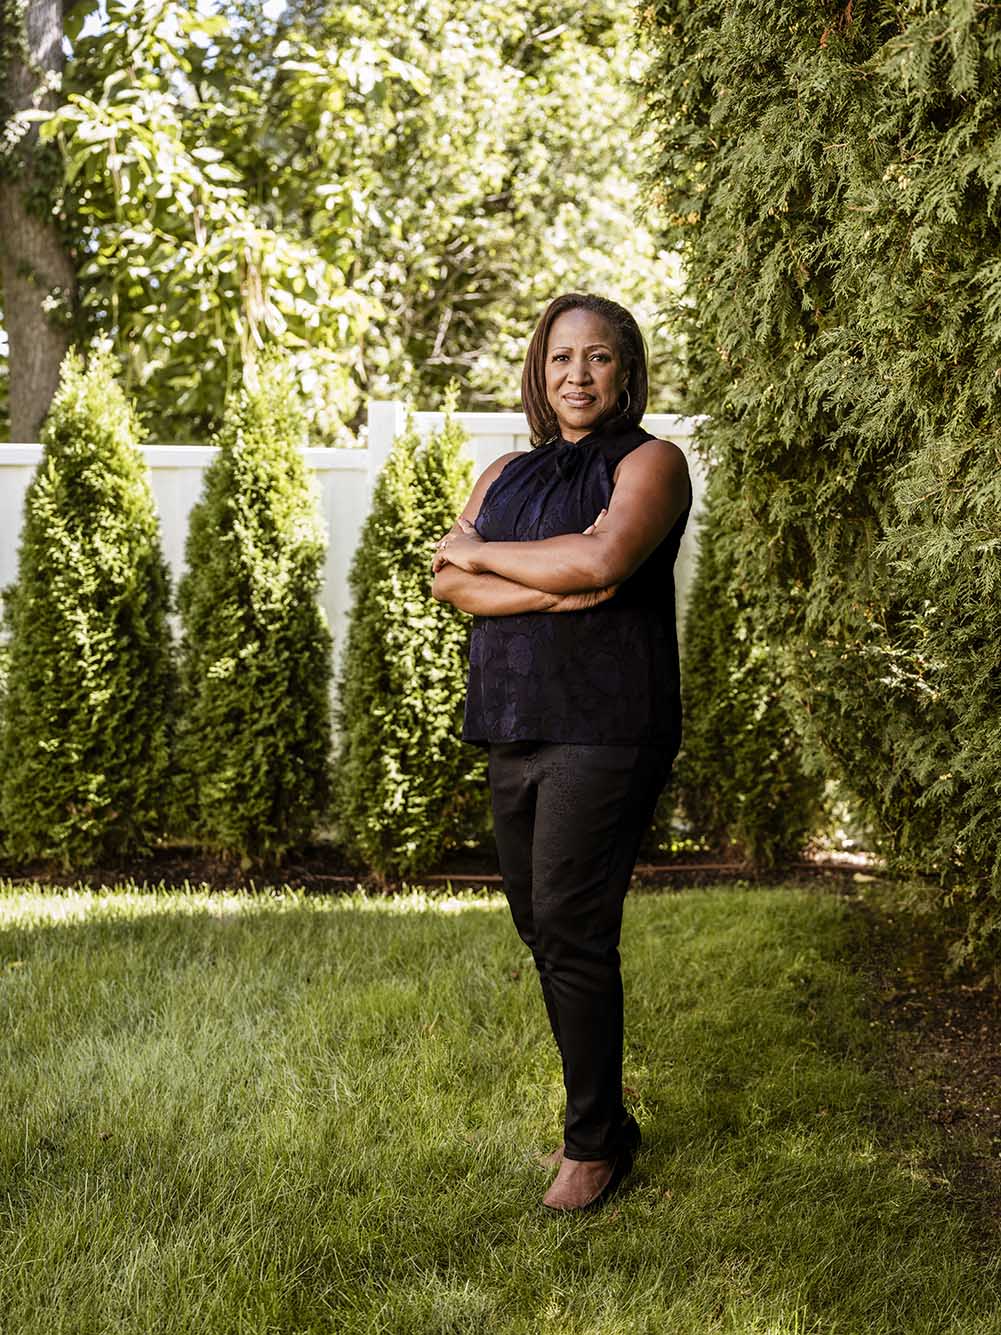 Photo: Charlene Coyne, a Black woman wearing a black blouse and black pants, smiles and poses with arms crossed on a lush, green lawn on a sunny day. Behind her, green shrubs line a tall, white fence.